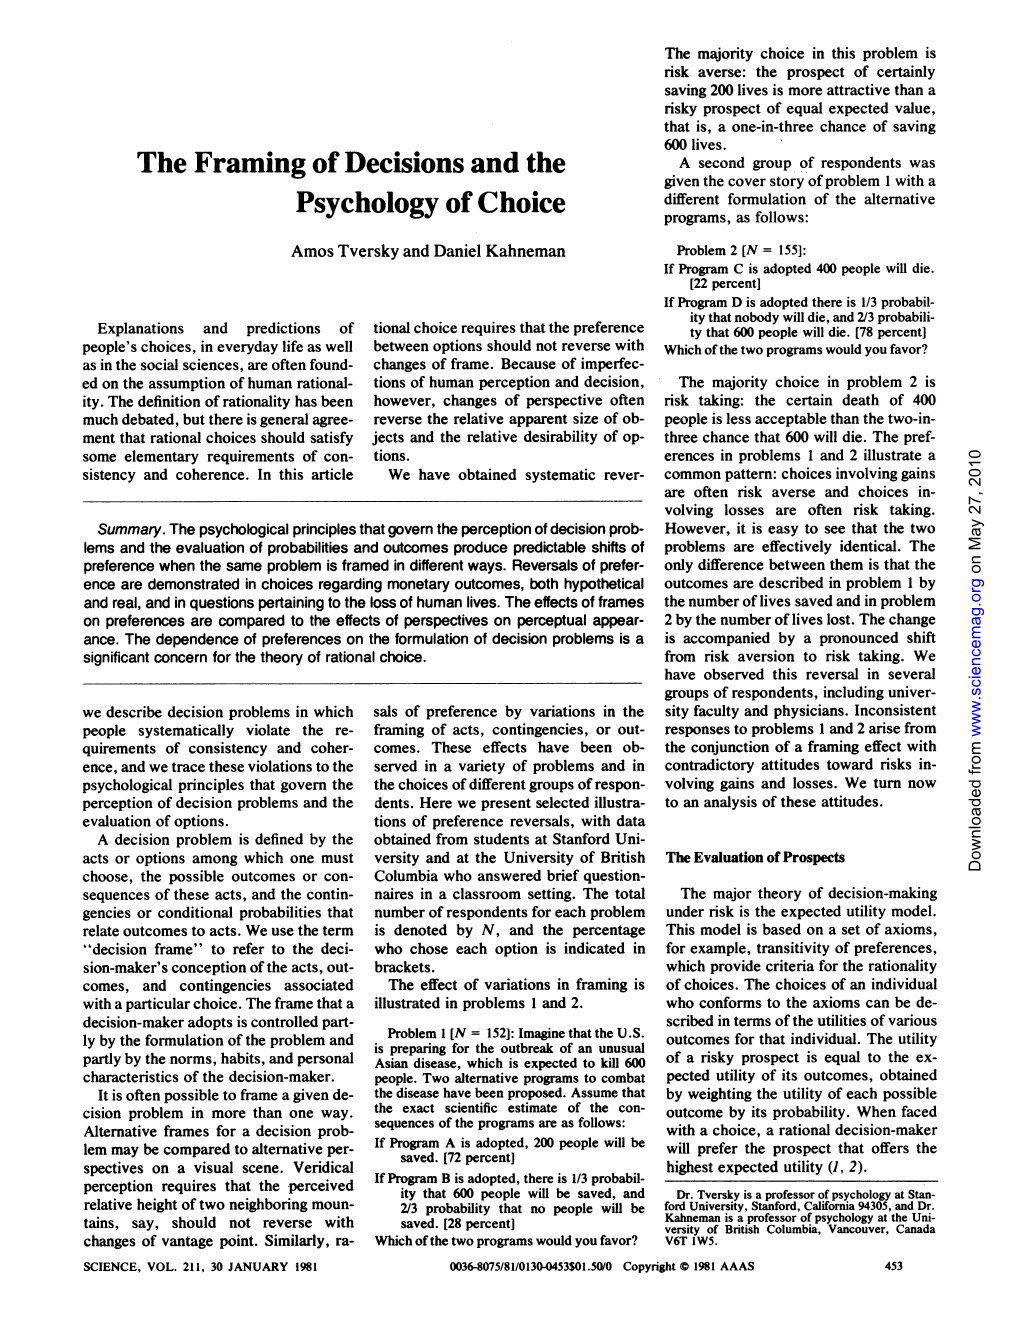 The Framing of Decisions and the Psychology of Choice